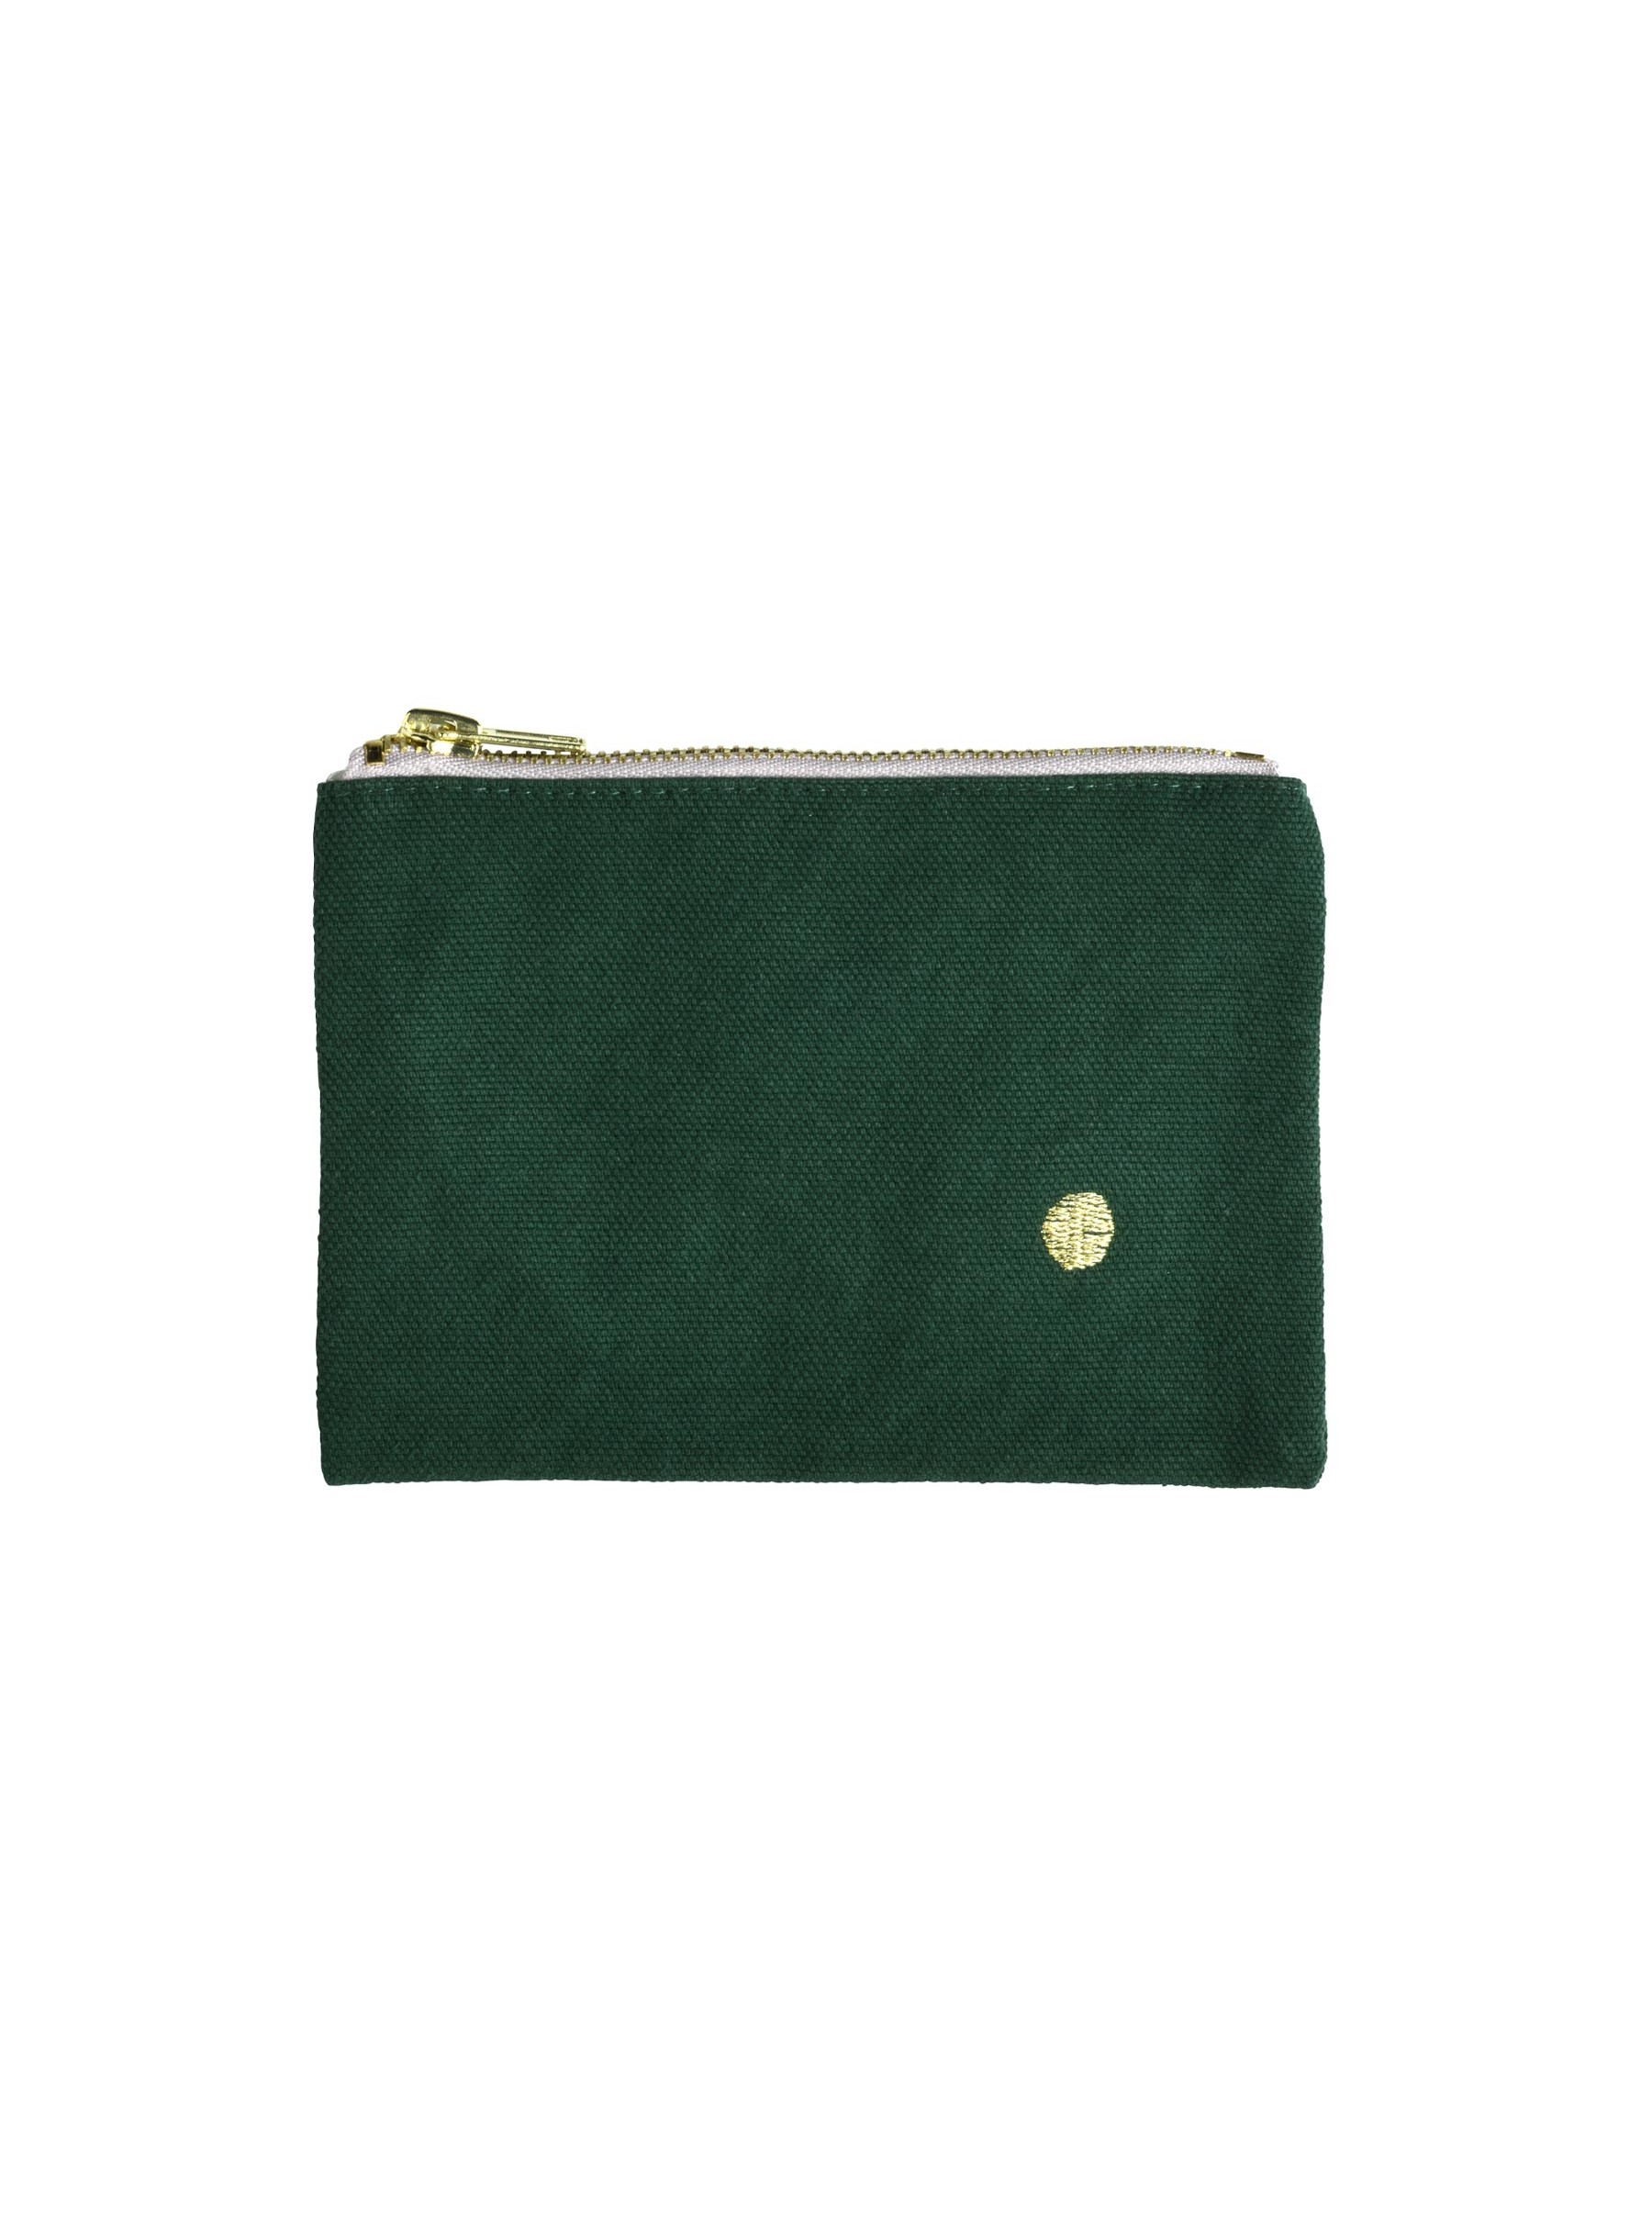 POUCH IONA S